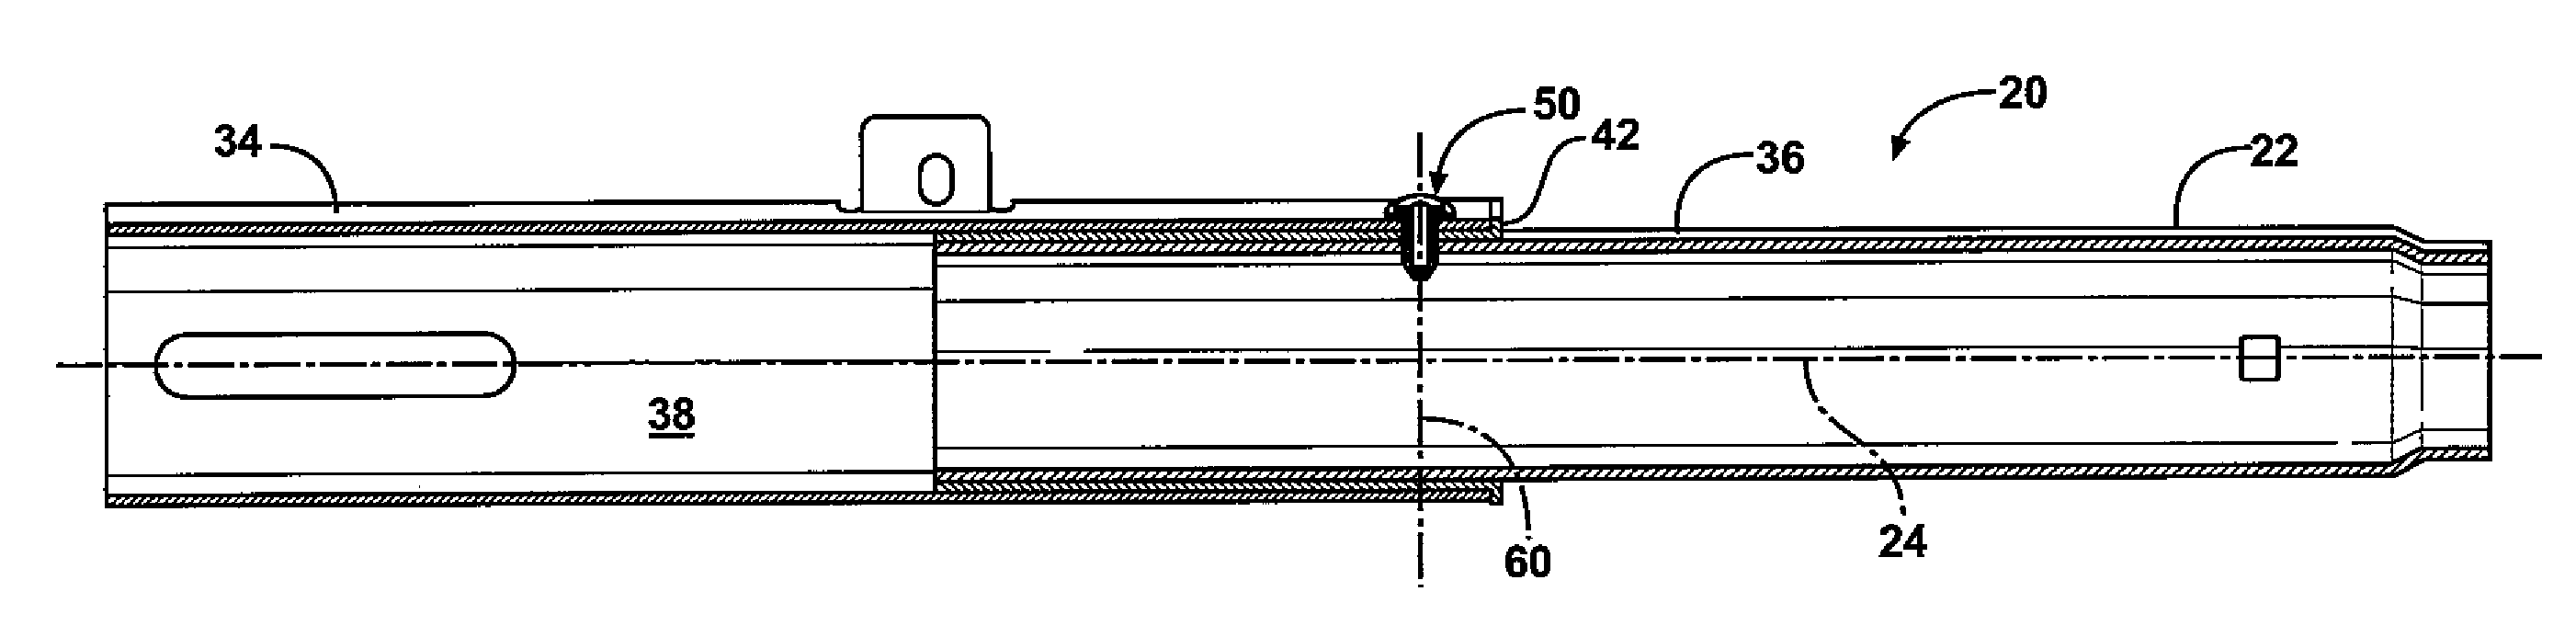 Steering column assembly with shearable jacket connector